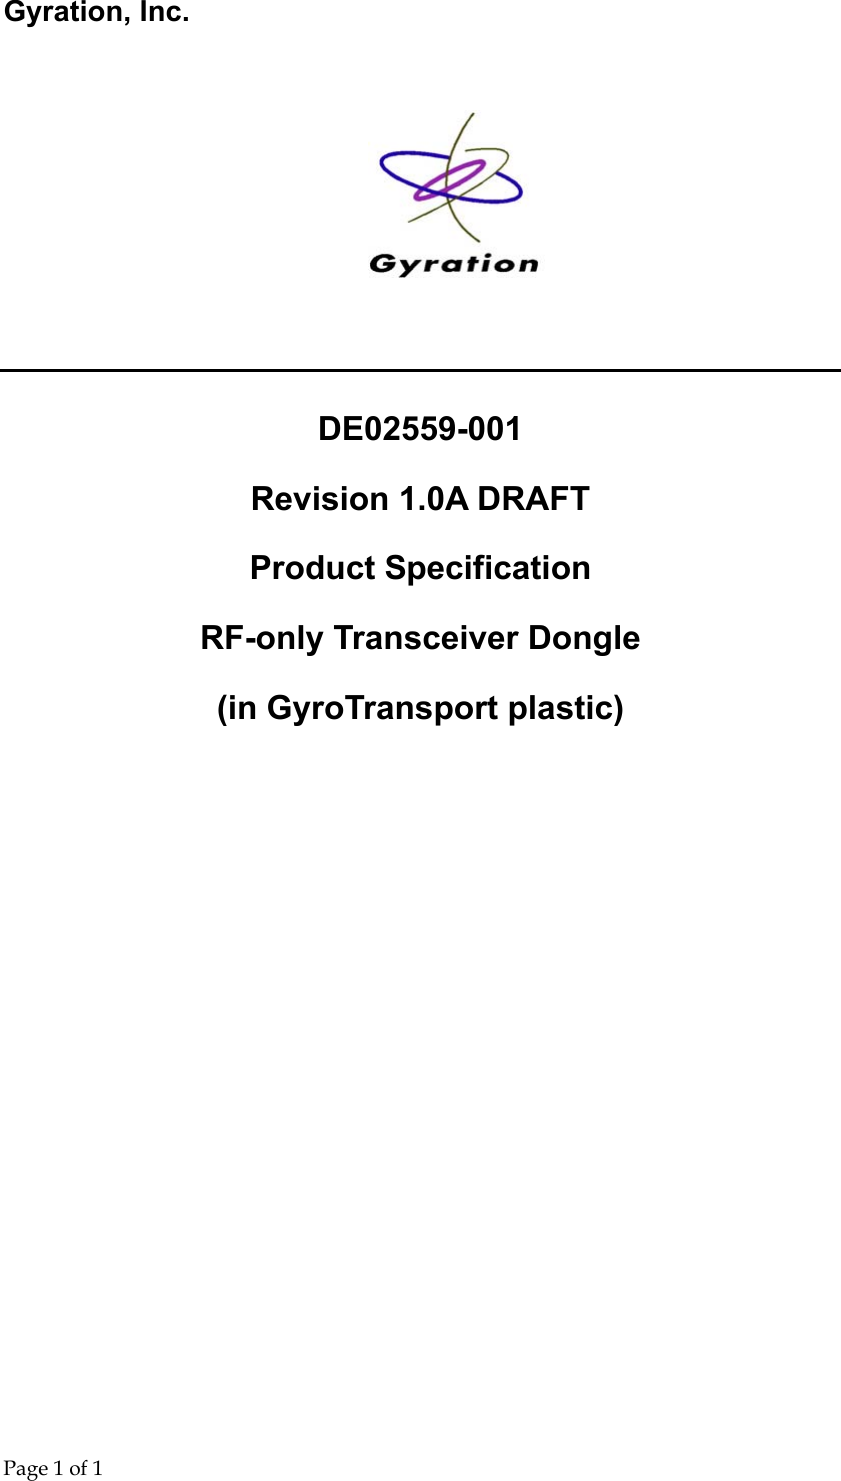 Gyration, Inc.     Page 1 of 1                                    DE02559-001 Revision 1.0A DRAFT Product Specification RF-only Transceiver Dongle  (in GyroTransport plastic)   